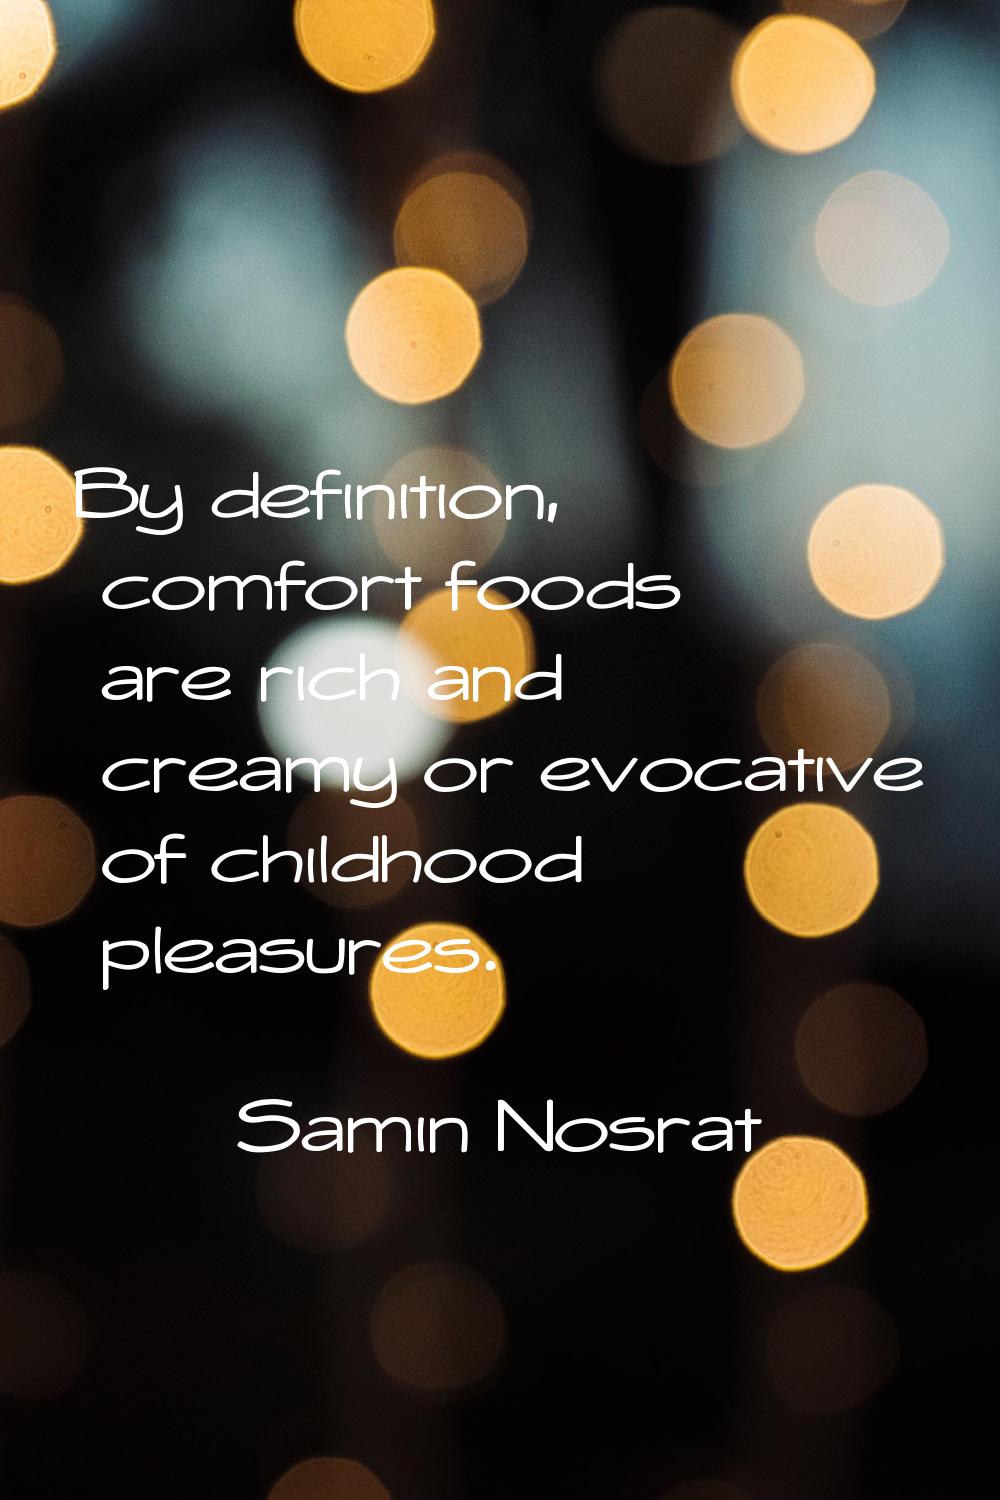 By definition, comfort foods are rich and creamy or evocative of childhood pleasures.